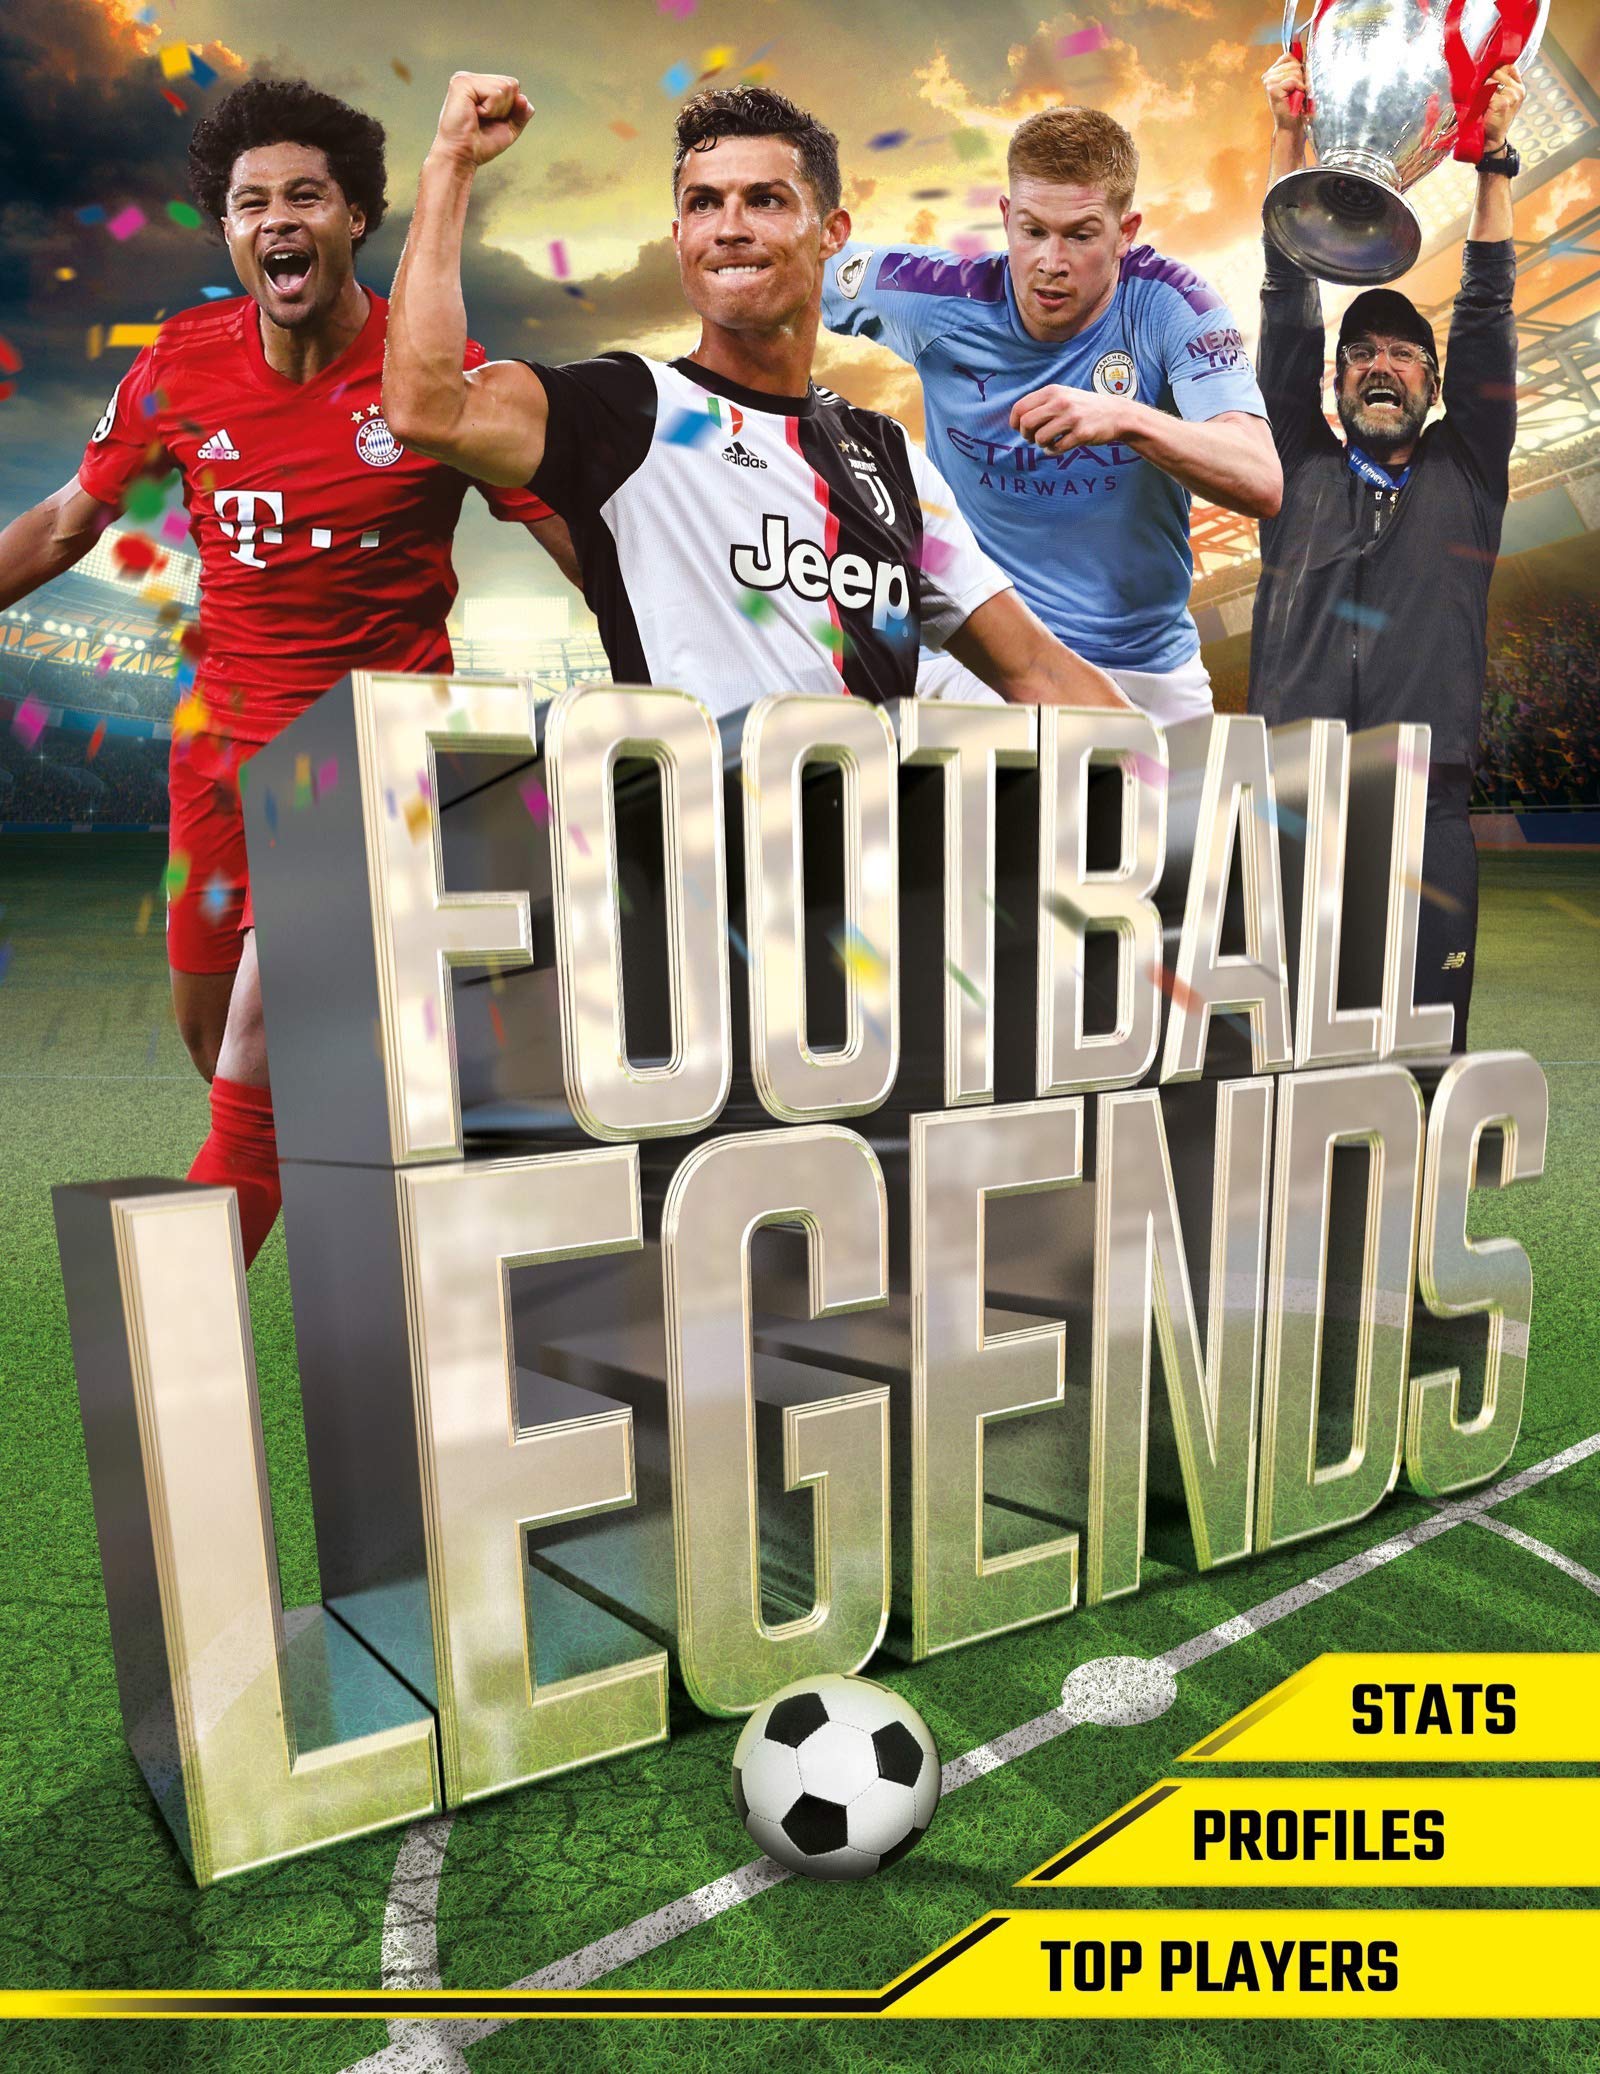 Football Legends: Stats, Profiles, Top Players